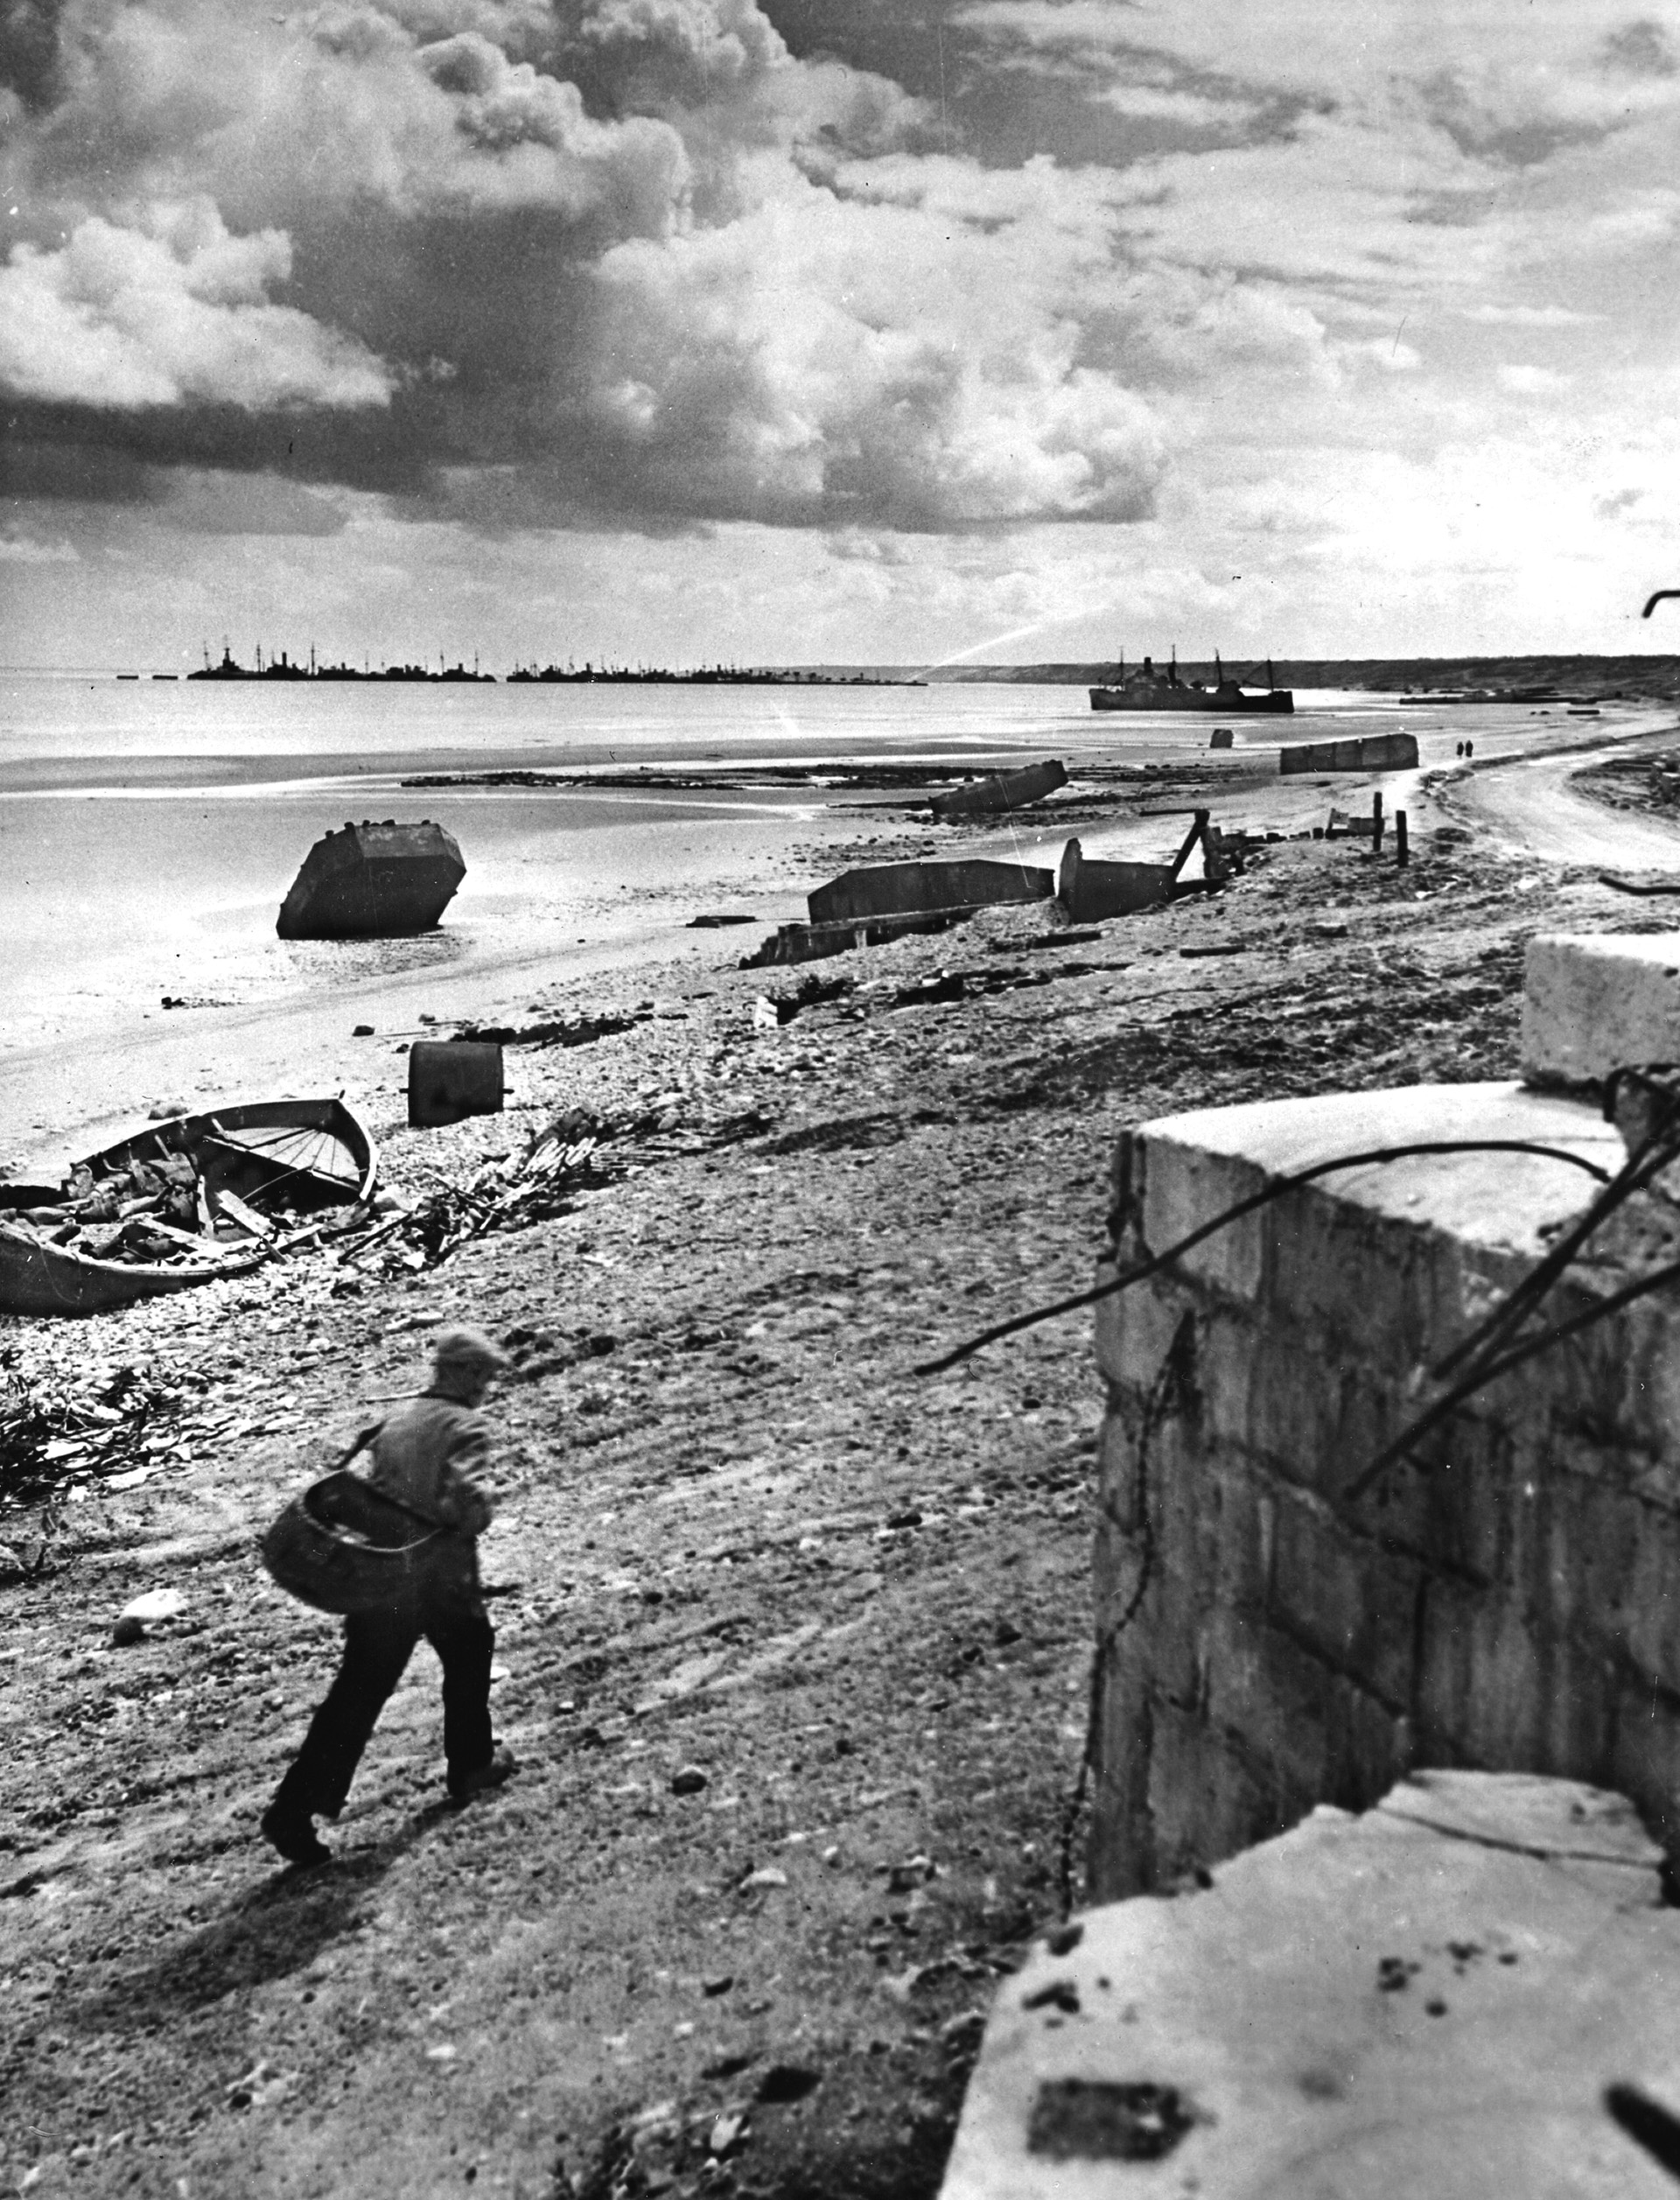 Frenchmen walks past a former German bunker on debris-strewn Omaha Beach near the Vierville exit where so much fierce fighting took place 12 months earlier.